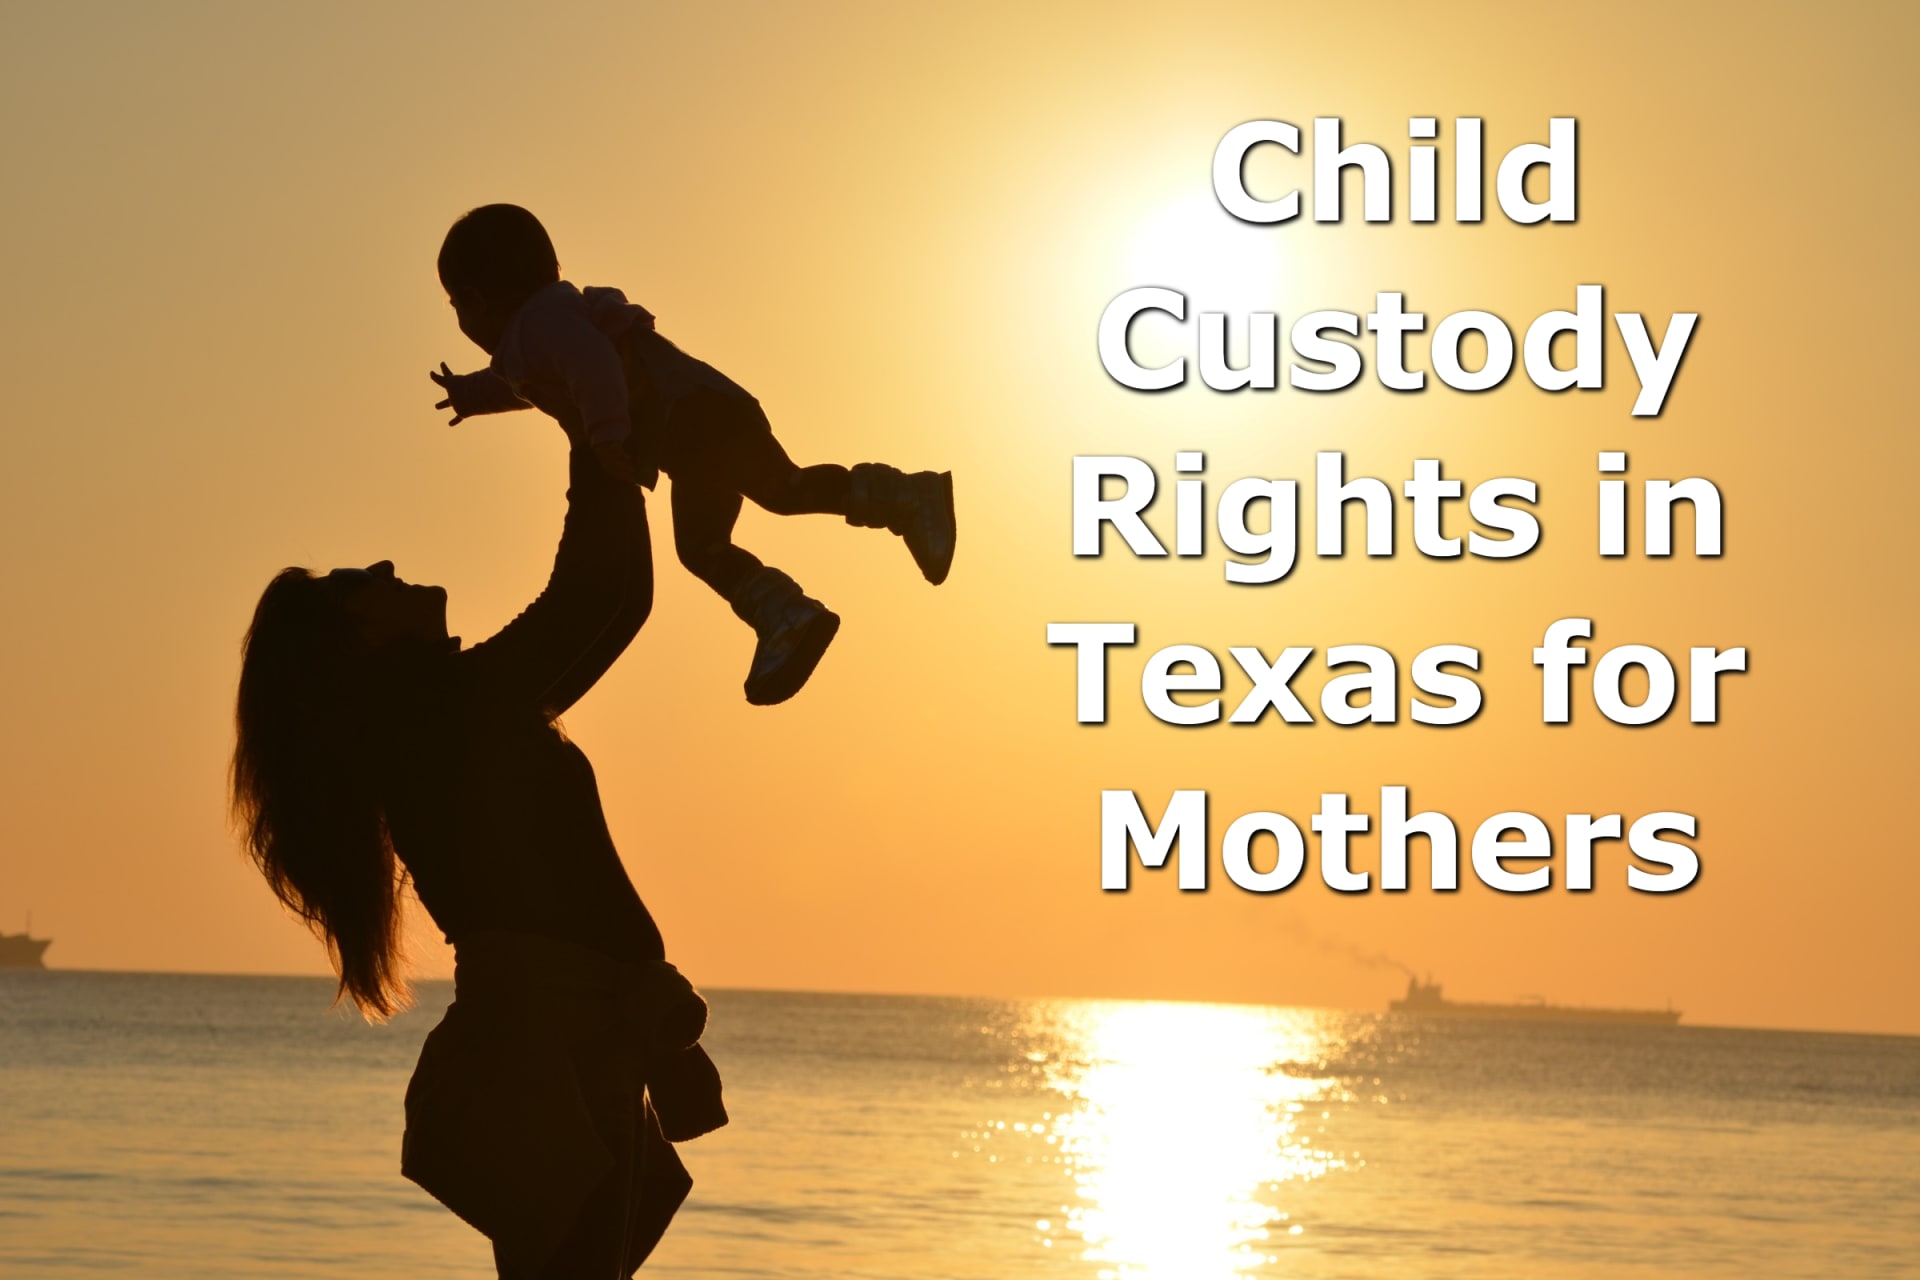 What Are the Child Custody Rights in Texas for Mothers?